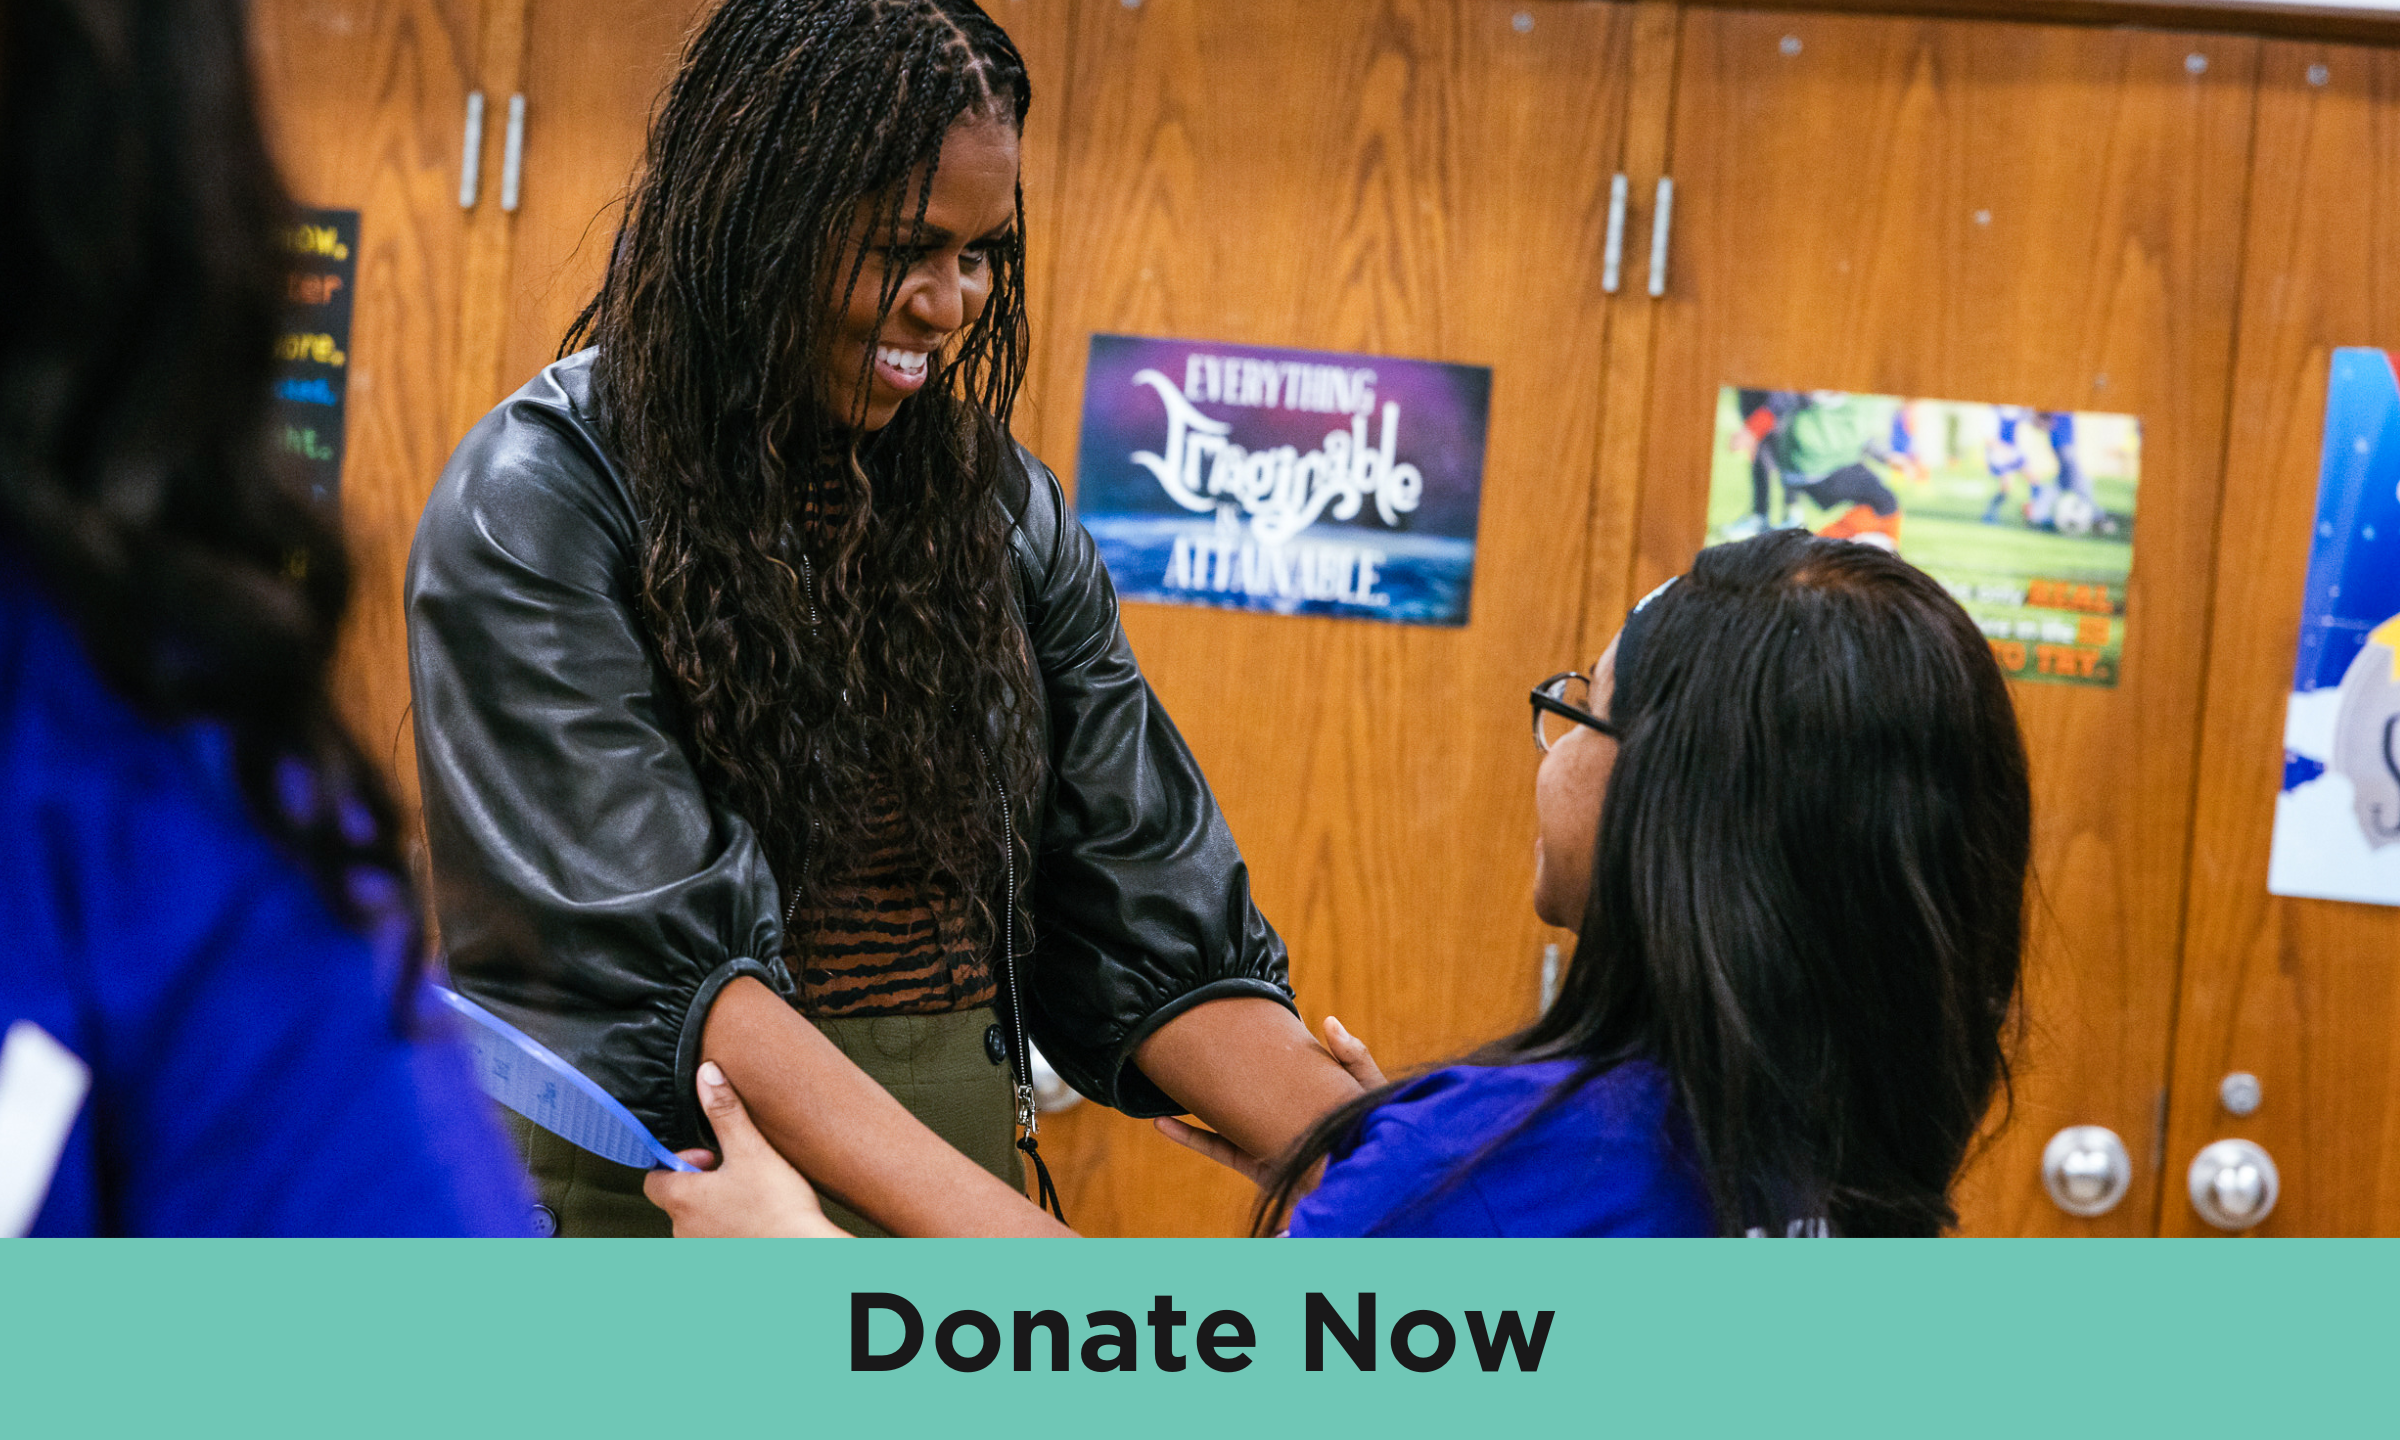 Michelle Obama, wearing a black top and long braids, is reaching out and looking at a child with medium skin tone and dark, shoulder length hair. Text at the bottom says “Donate now”. 